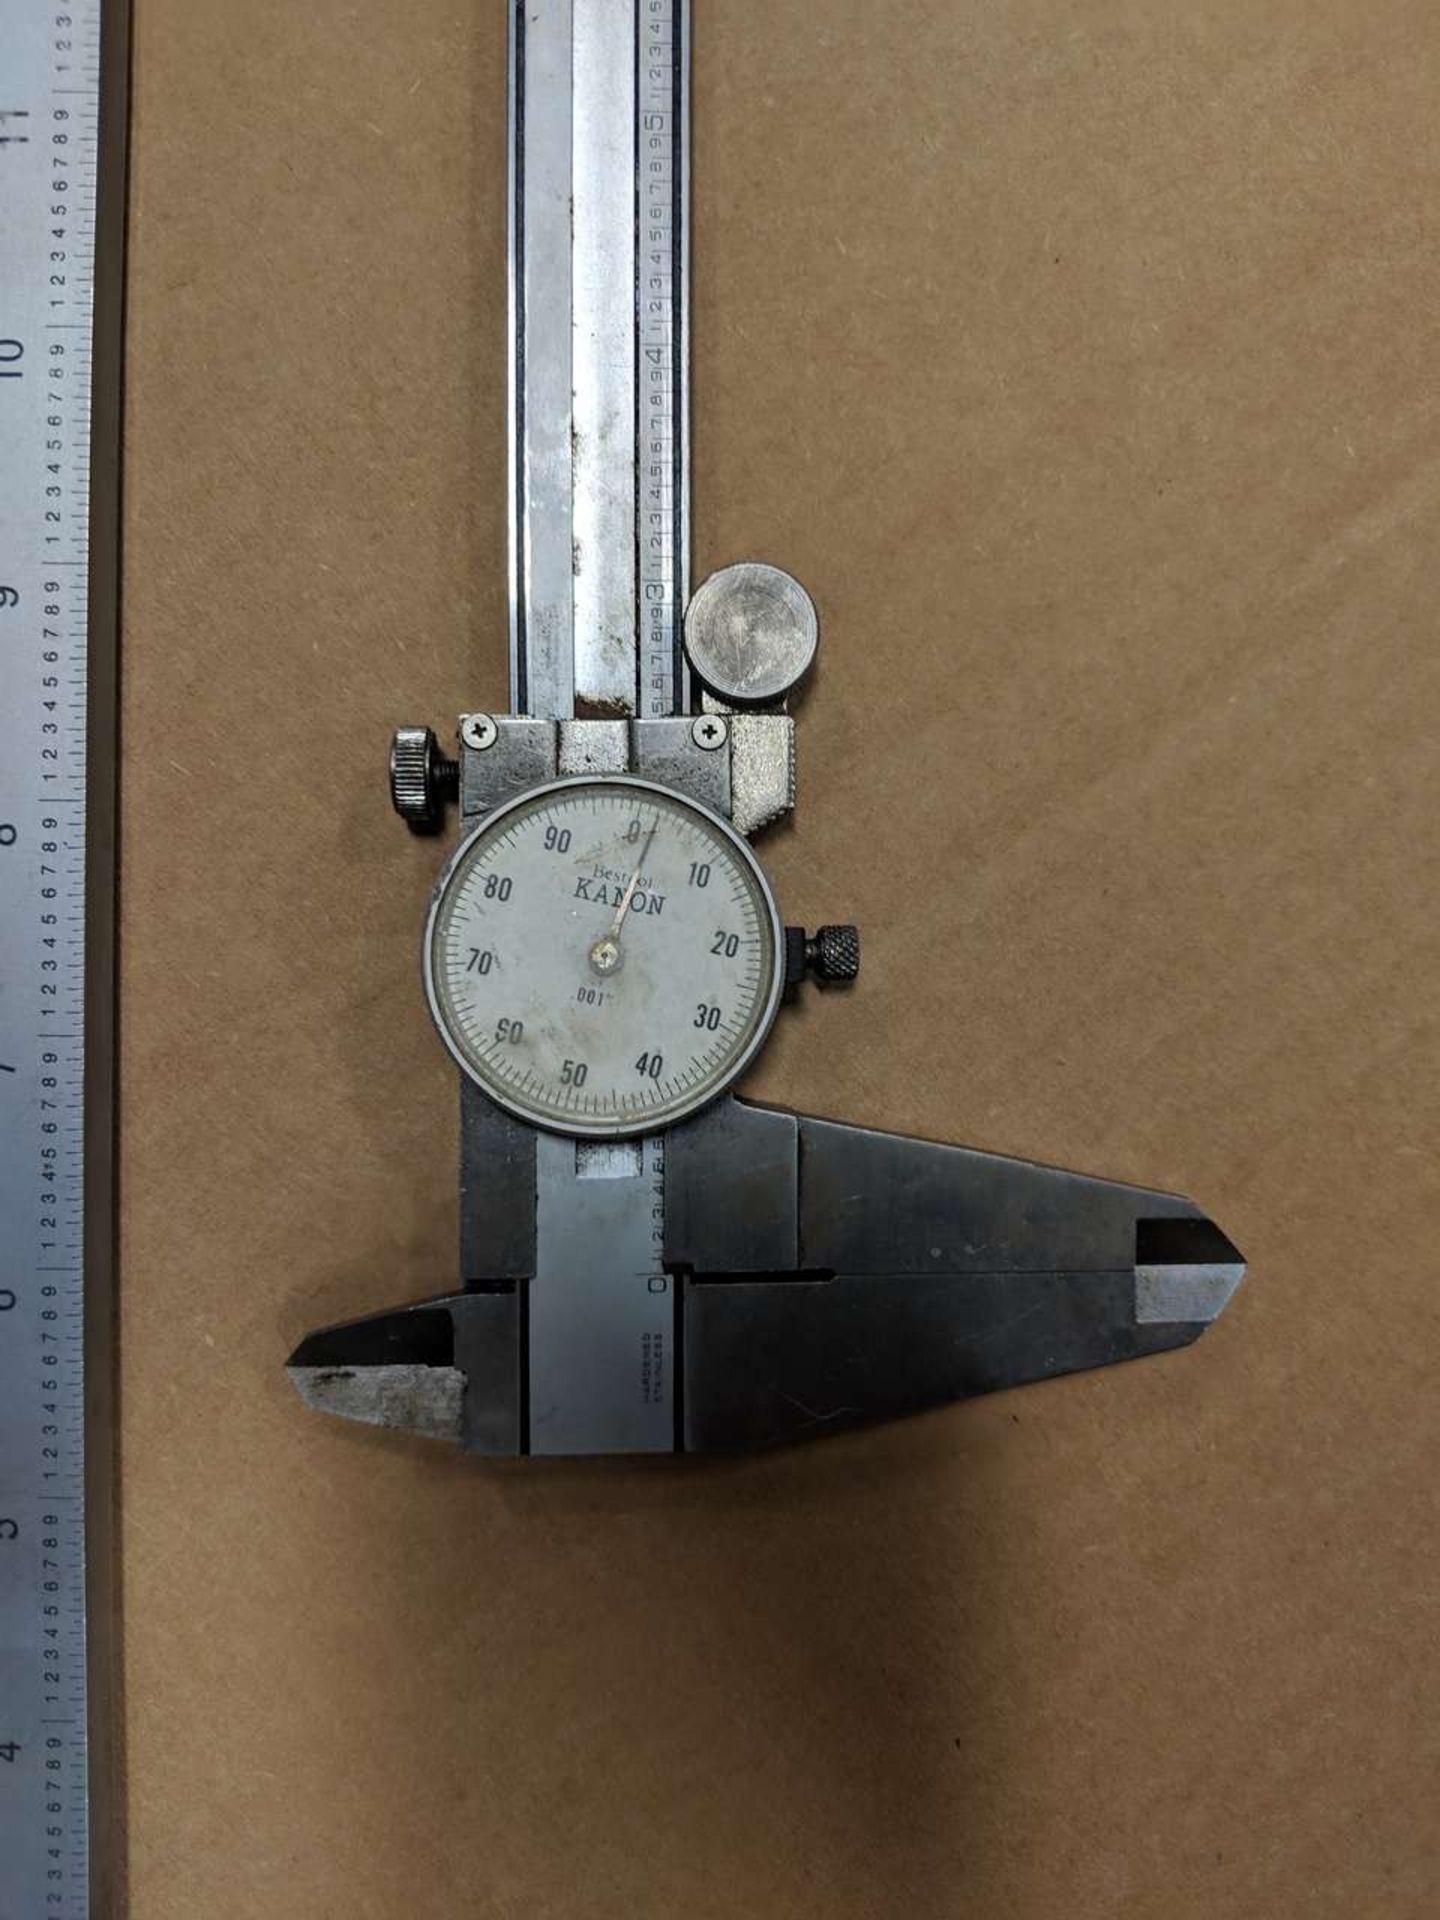 SET OF 2 CALIPERS - Image 2 of 3